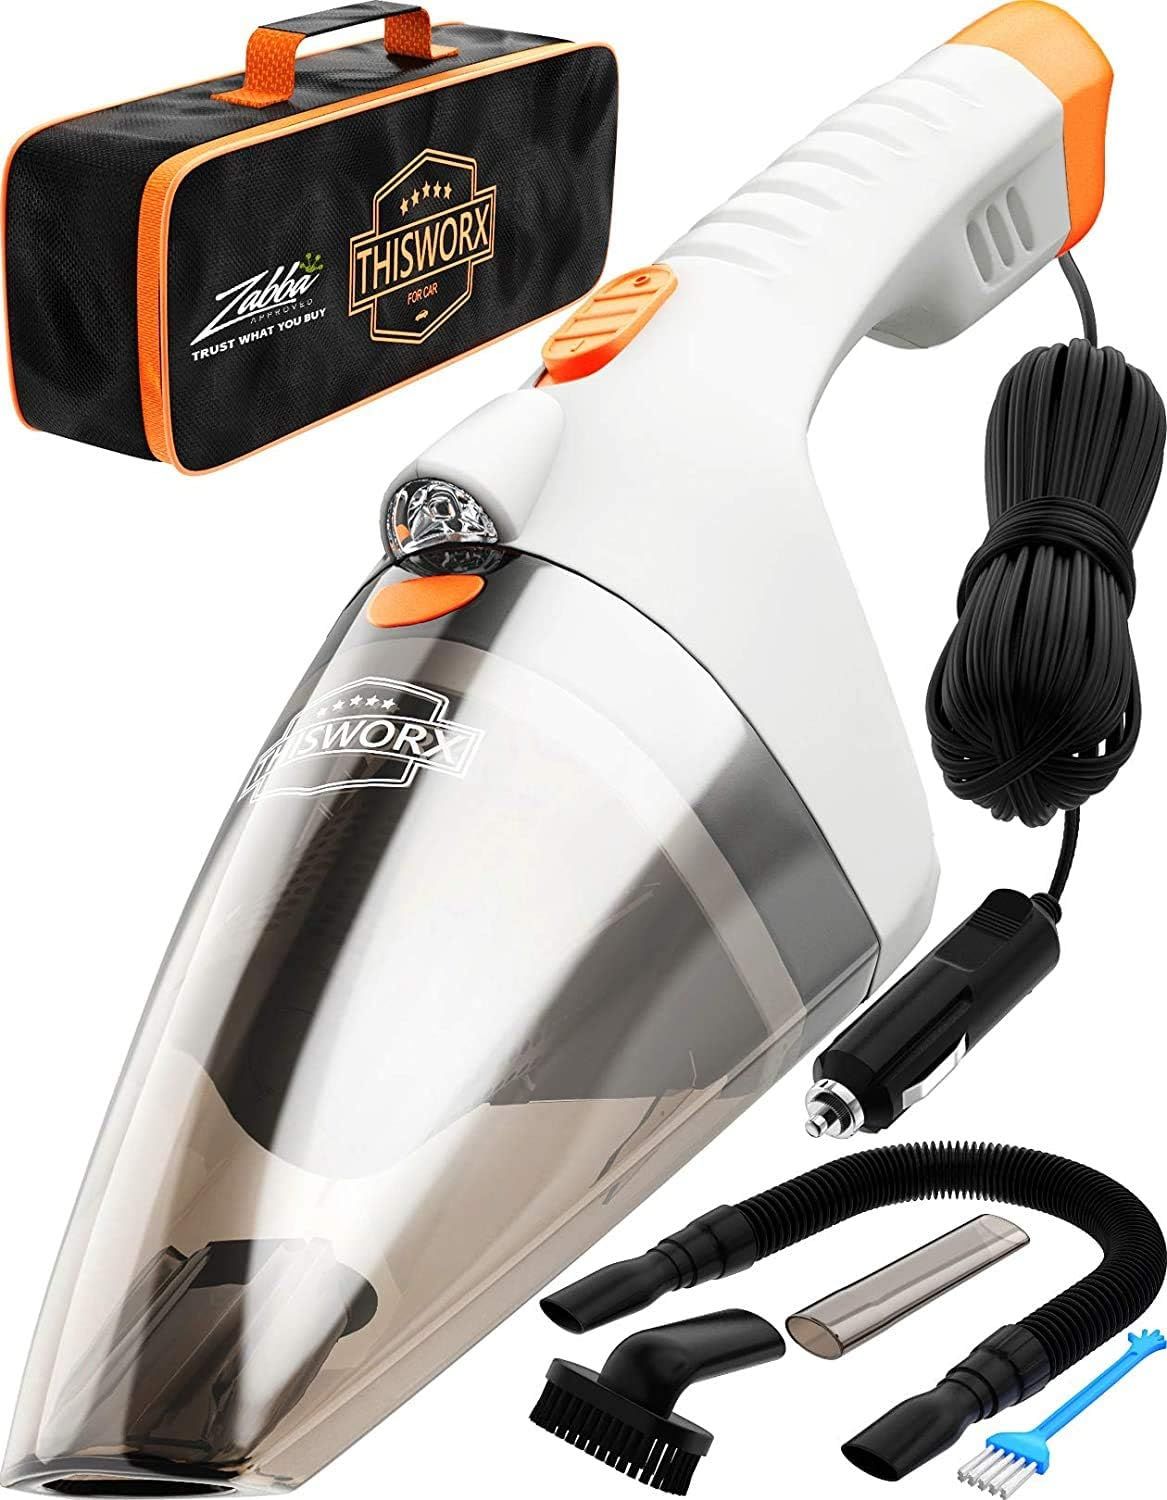 ThisWorx Car Vacuum Cleaner - LED Light, Portable, High Power Handheld Vacuums w/ 3 Attachments, ... | Amazon (US)